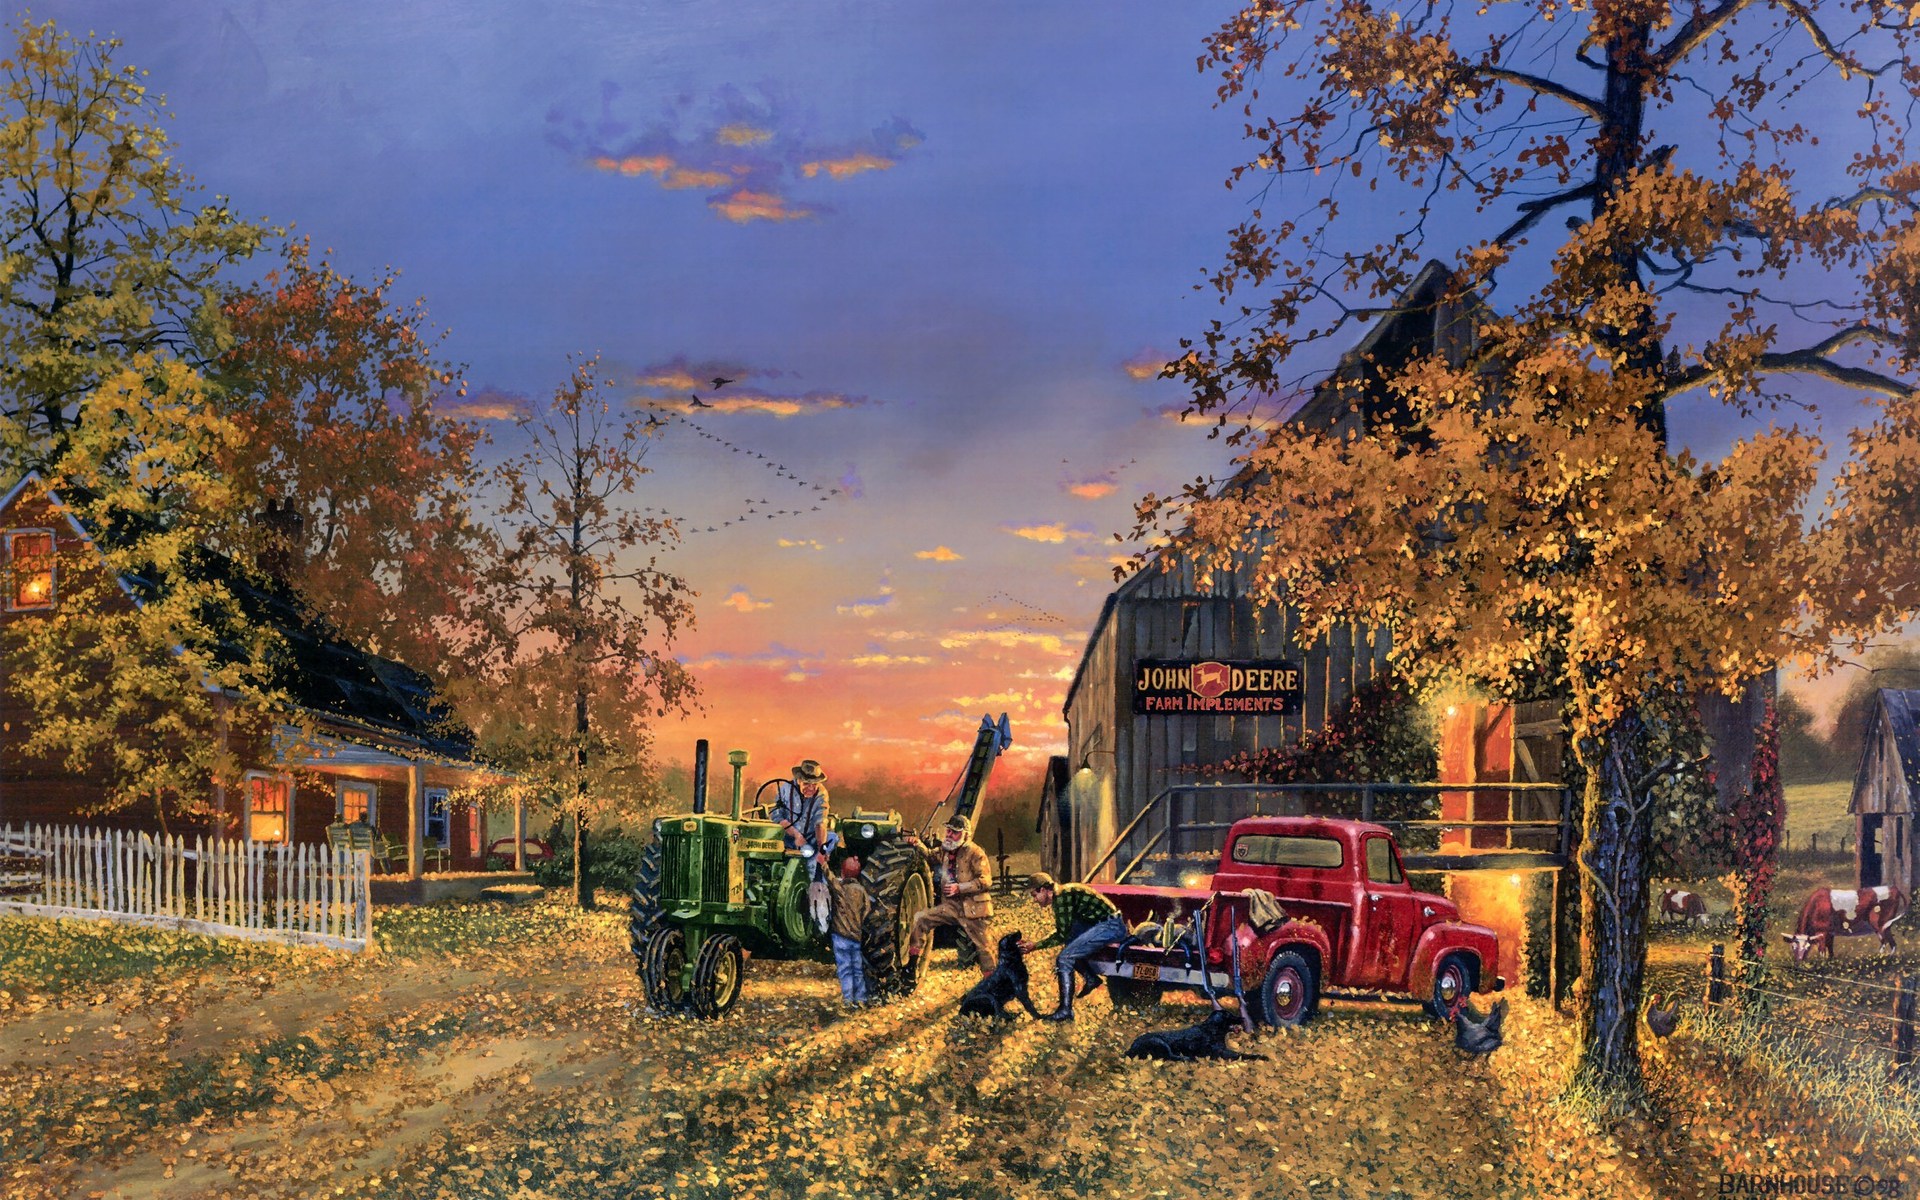 dave barnhouse, Barnhouse, Paintings, Country, Artistic, Farm, Vehicles, Tractor, People, Landscapes, Autumn, Fall, Seasons, Holidays, Thanksgiving Wallpaper